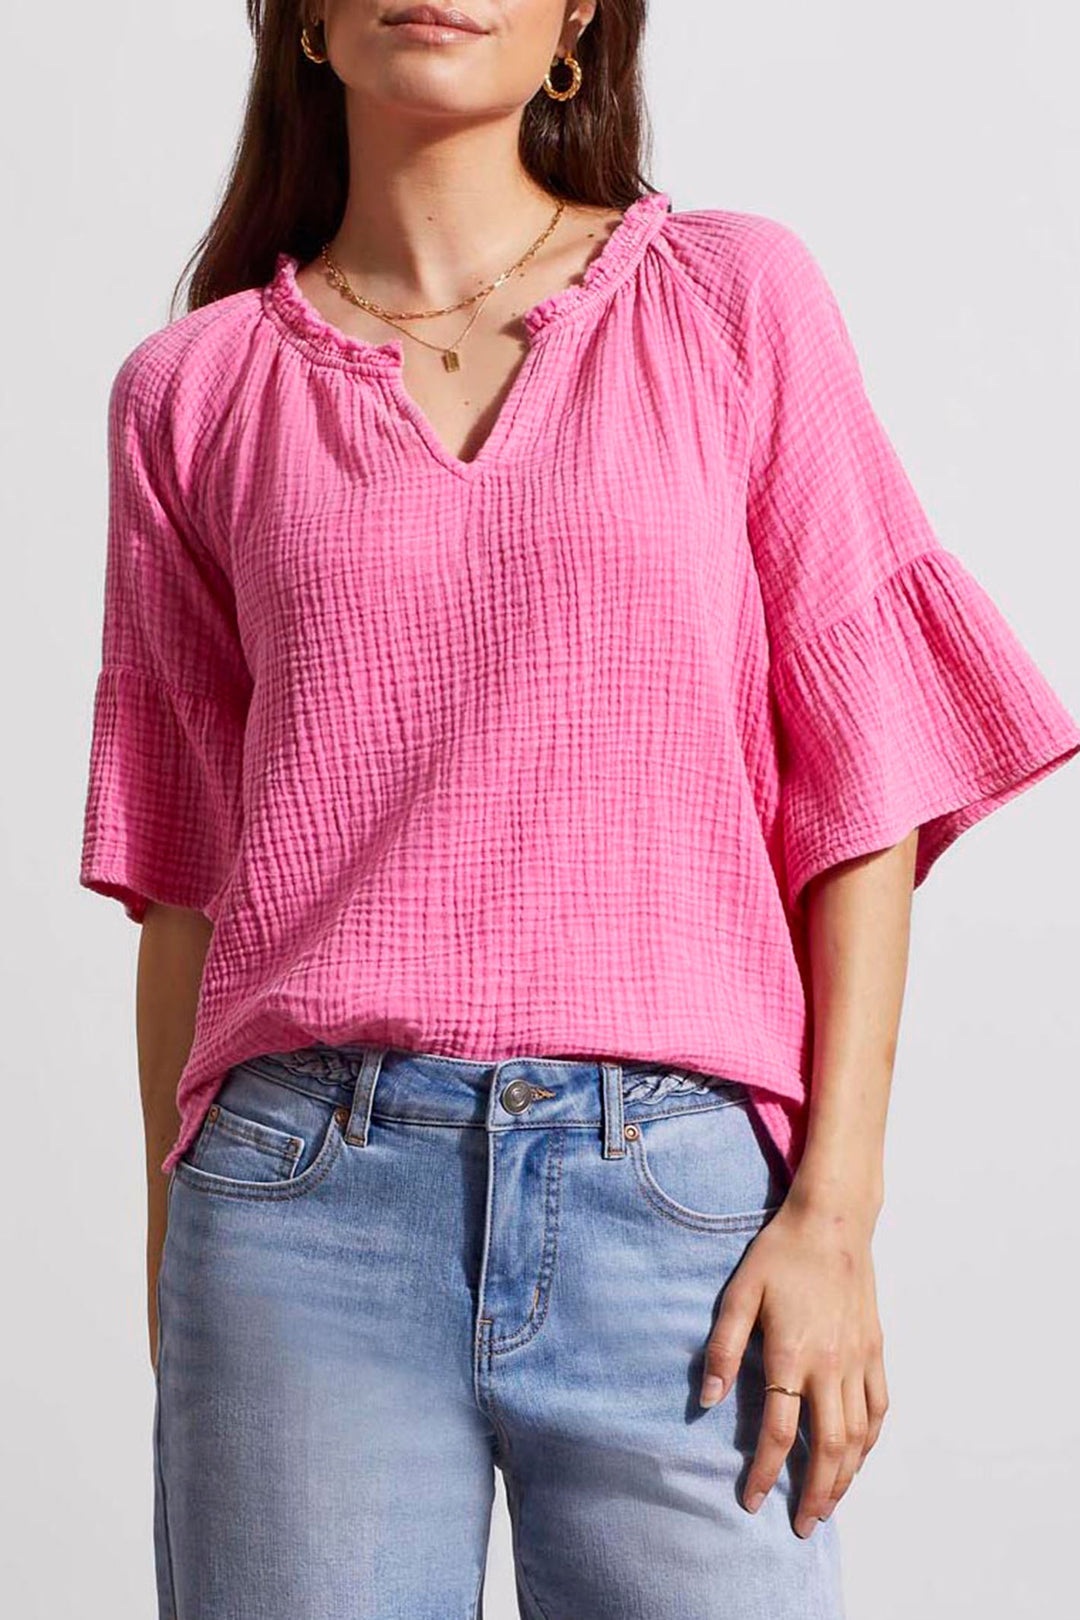 Tribal 5349O Hot Pink Notch Neckline Cotton Top - Experience Boutique